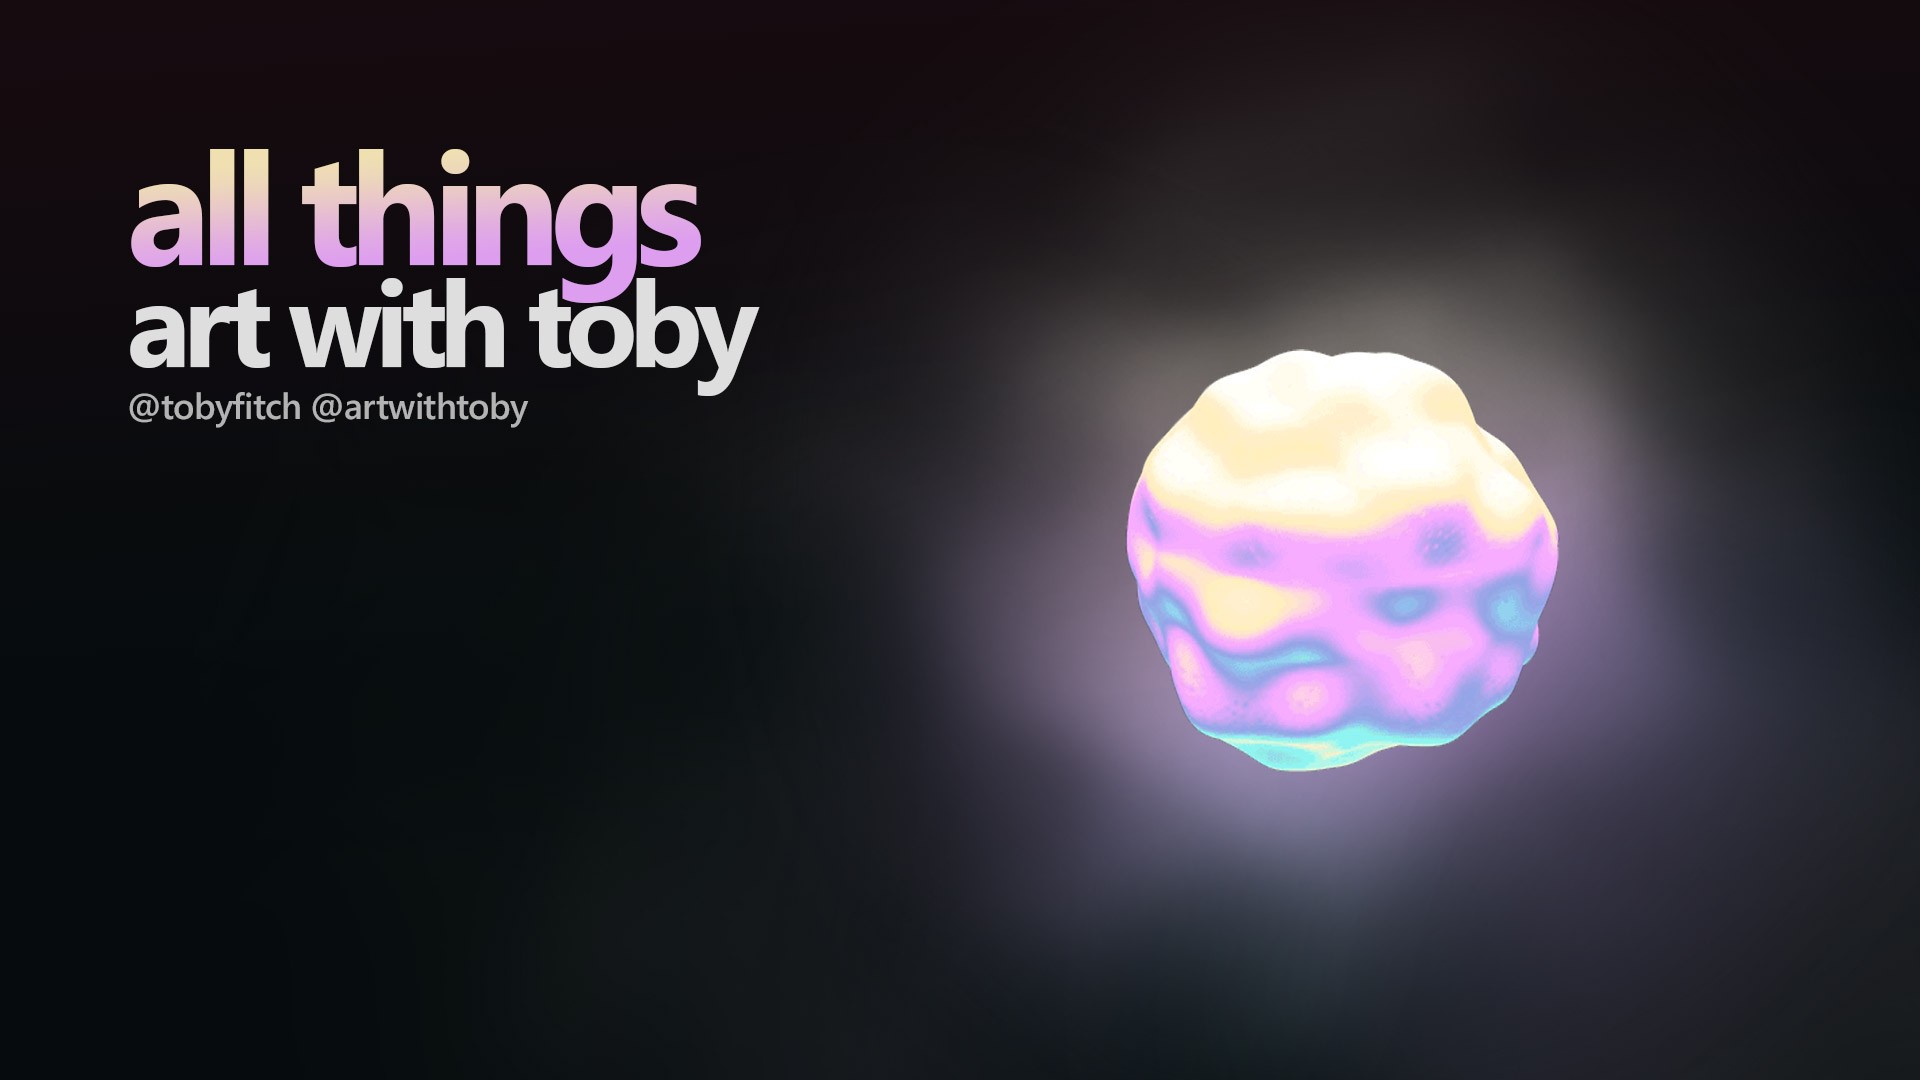 ID: The background is black. The white, pink, and blue sphere is glowing. Text in purple and white reads: all things, art with toby, @tobyfitch @artwithtoby